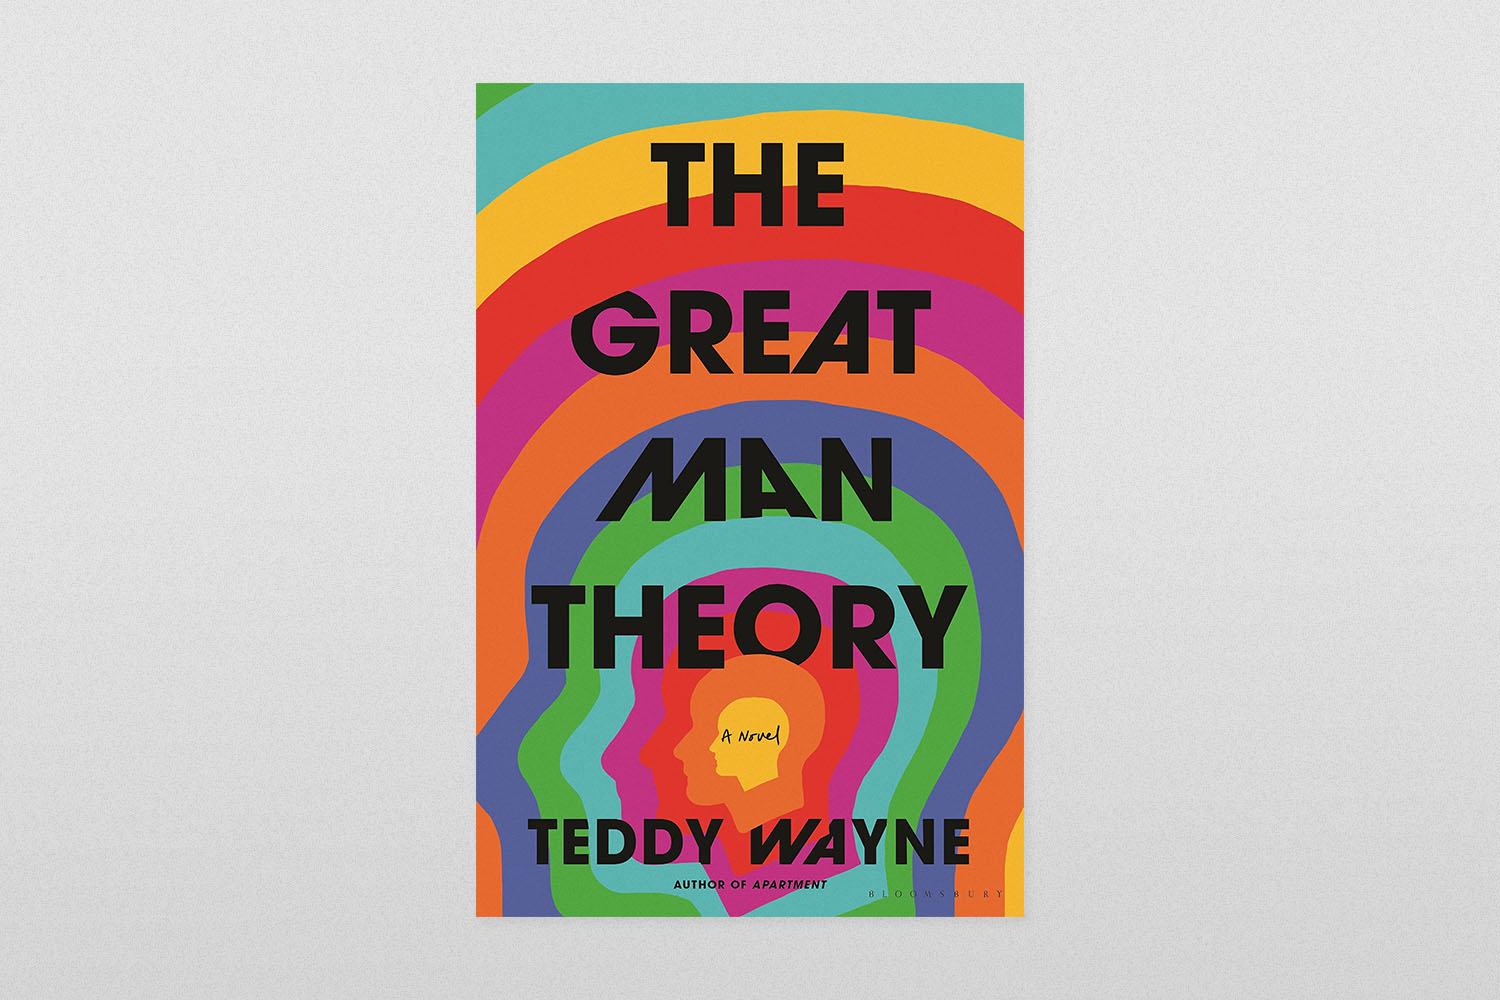 "The Great Man Theory"